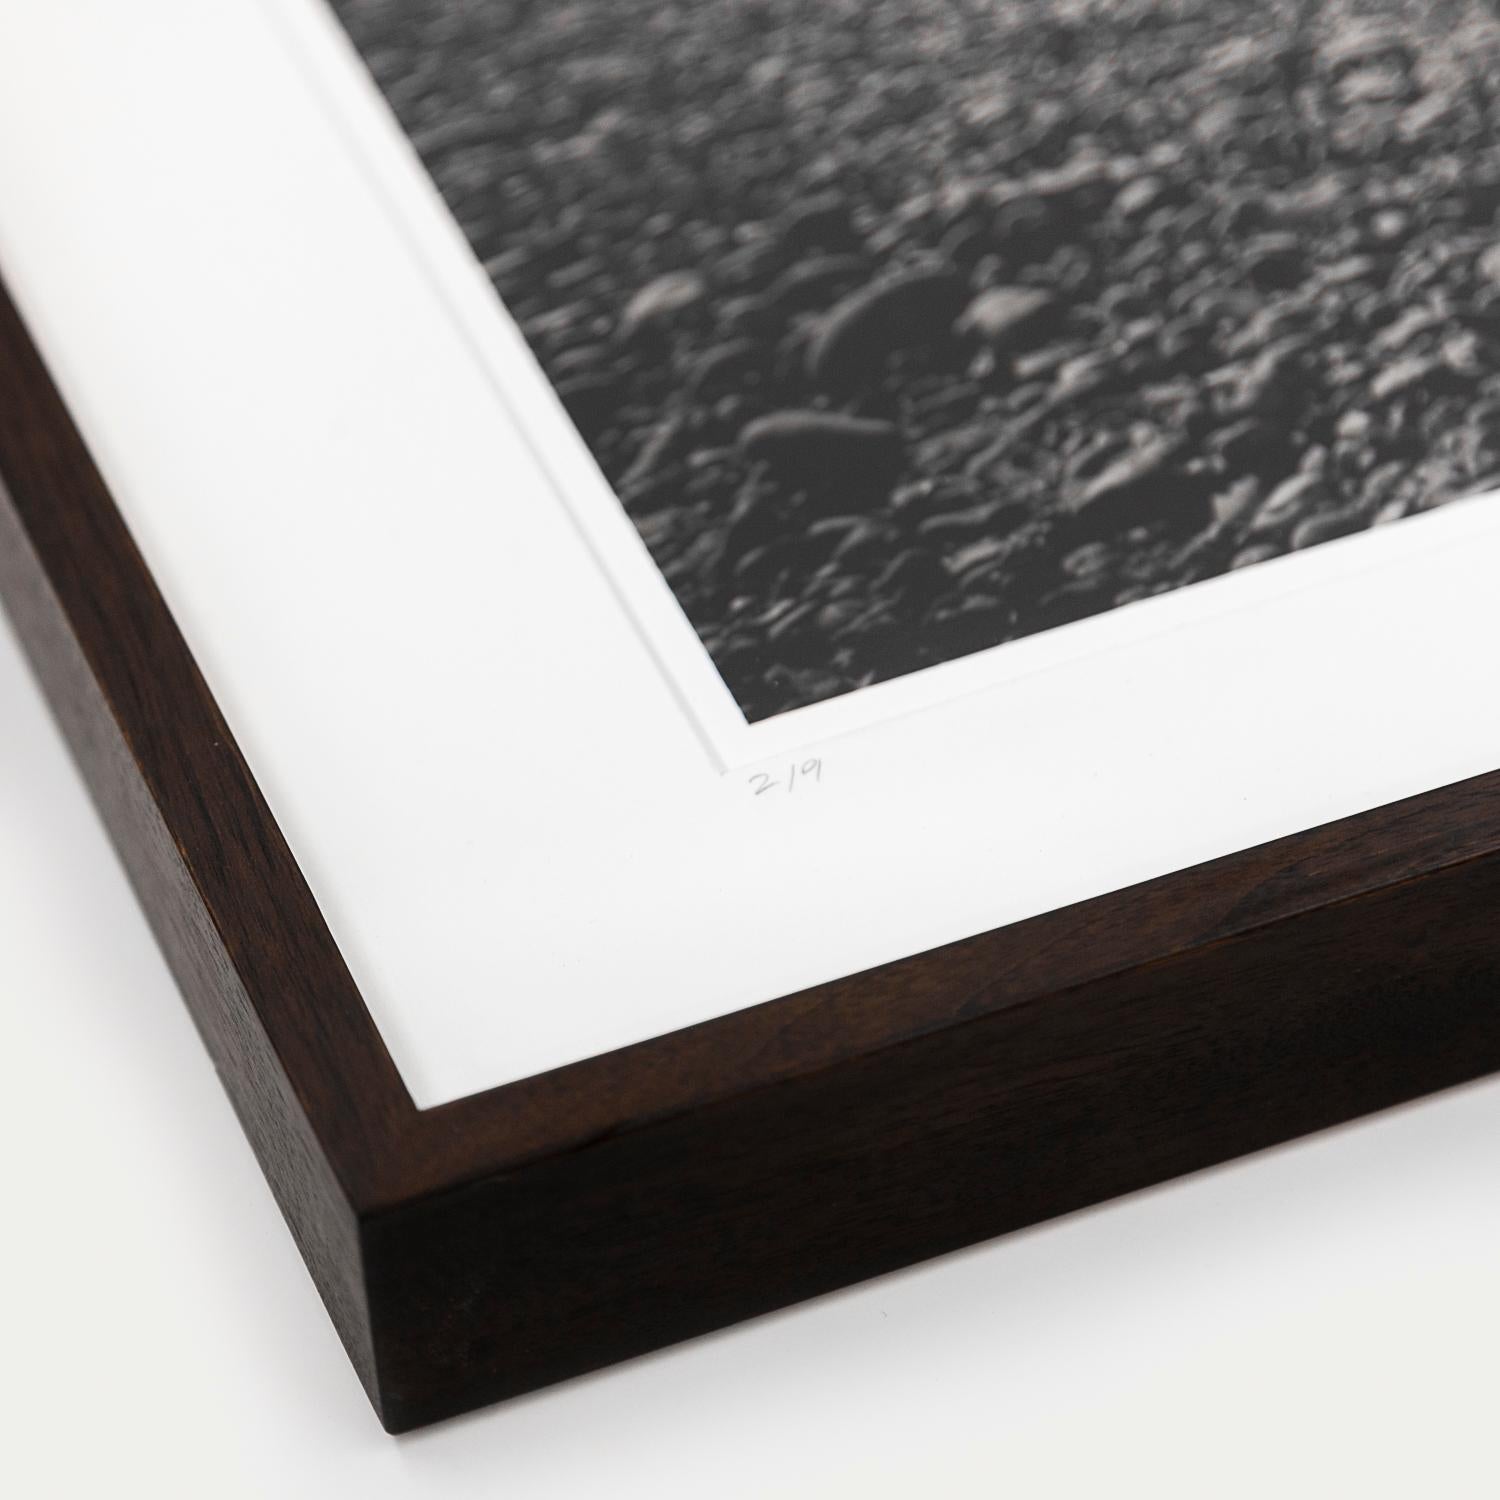 Gerald Berghammer - Limited Edition 2/9
Silver Gelatin Prints, Selenium Toned, Printed 2019
Signed, numbered, dated by Artis.
Handmade wood frame, dark-brown, natural white archival Passepartout, anti-reflection white glass, UV-protection 70, metal